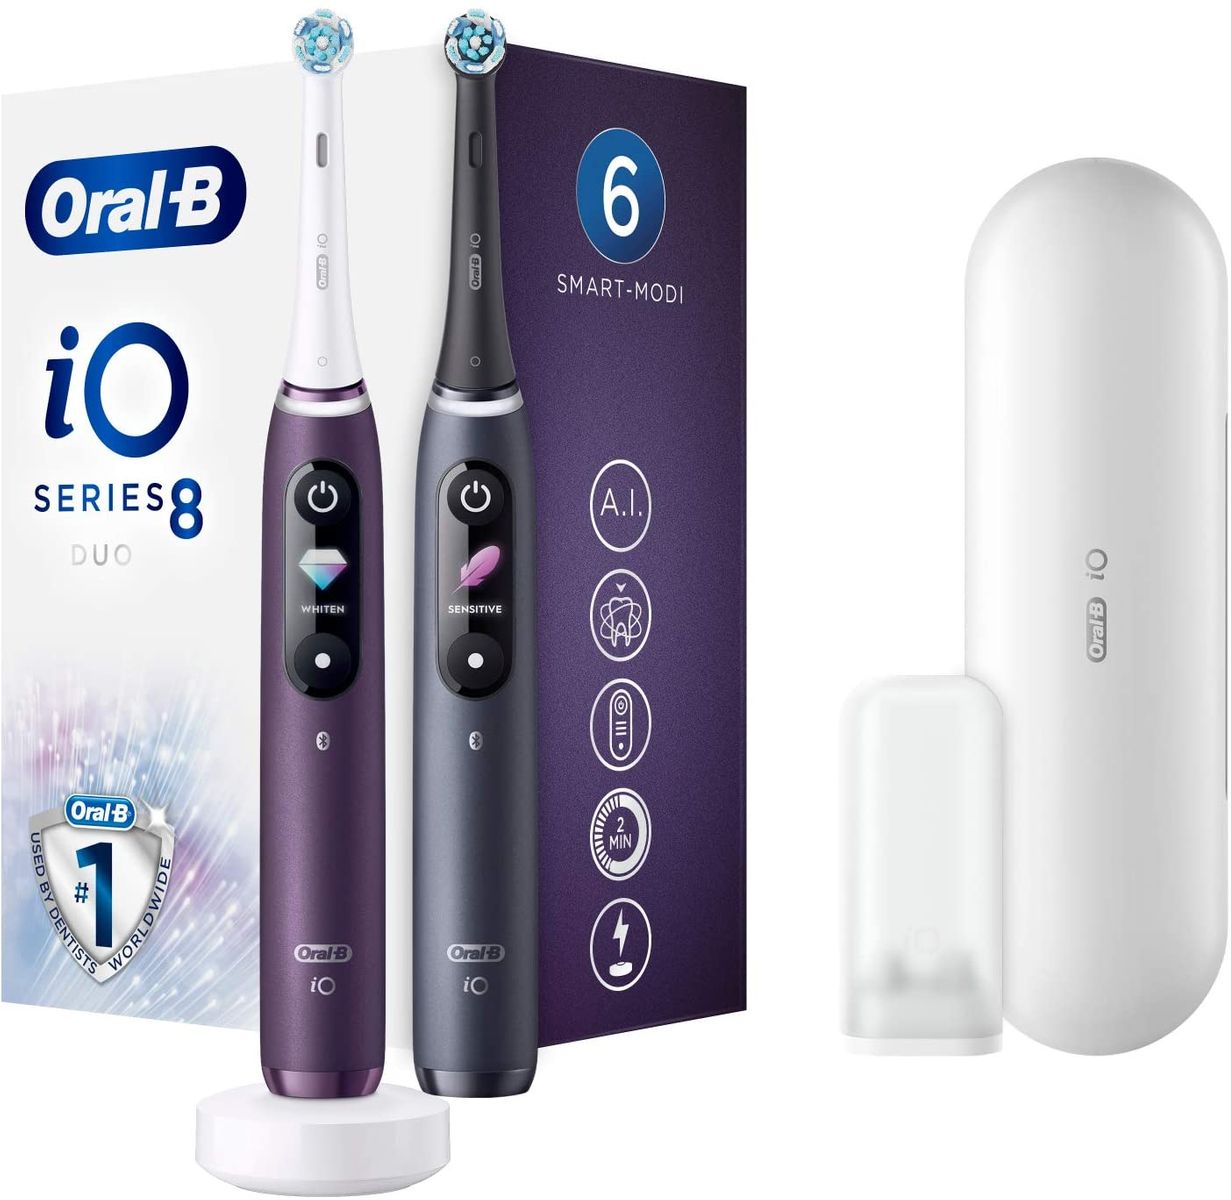 Oral-B iO 8 Twin Pack Electric Toothbrush/Electric Toothbrush with revolutionary magnetic technology & micro vibrations, 6 brushing programs, color display & travel case, black onyx/violet ametrine Twin Pack Black Onyx/Violet Ametrine